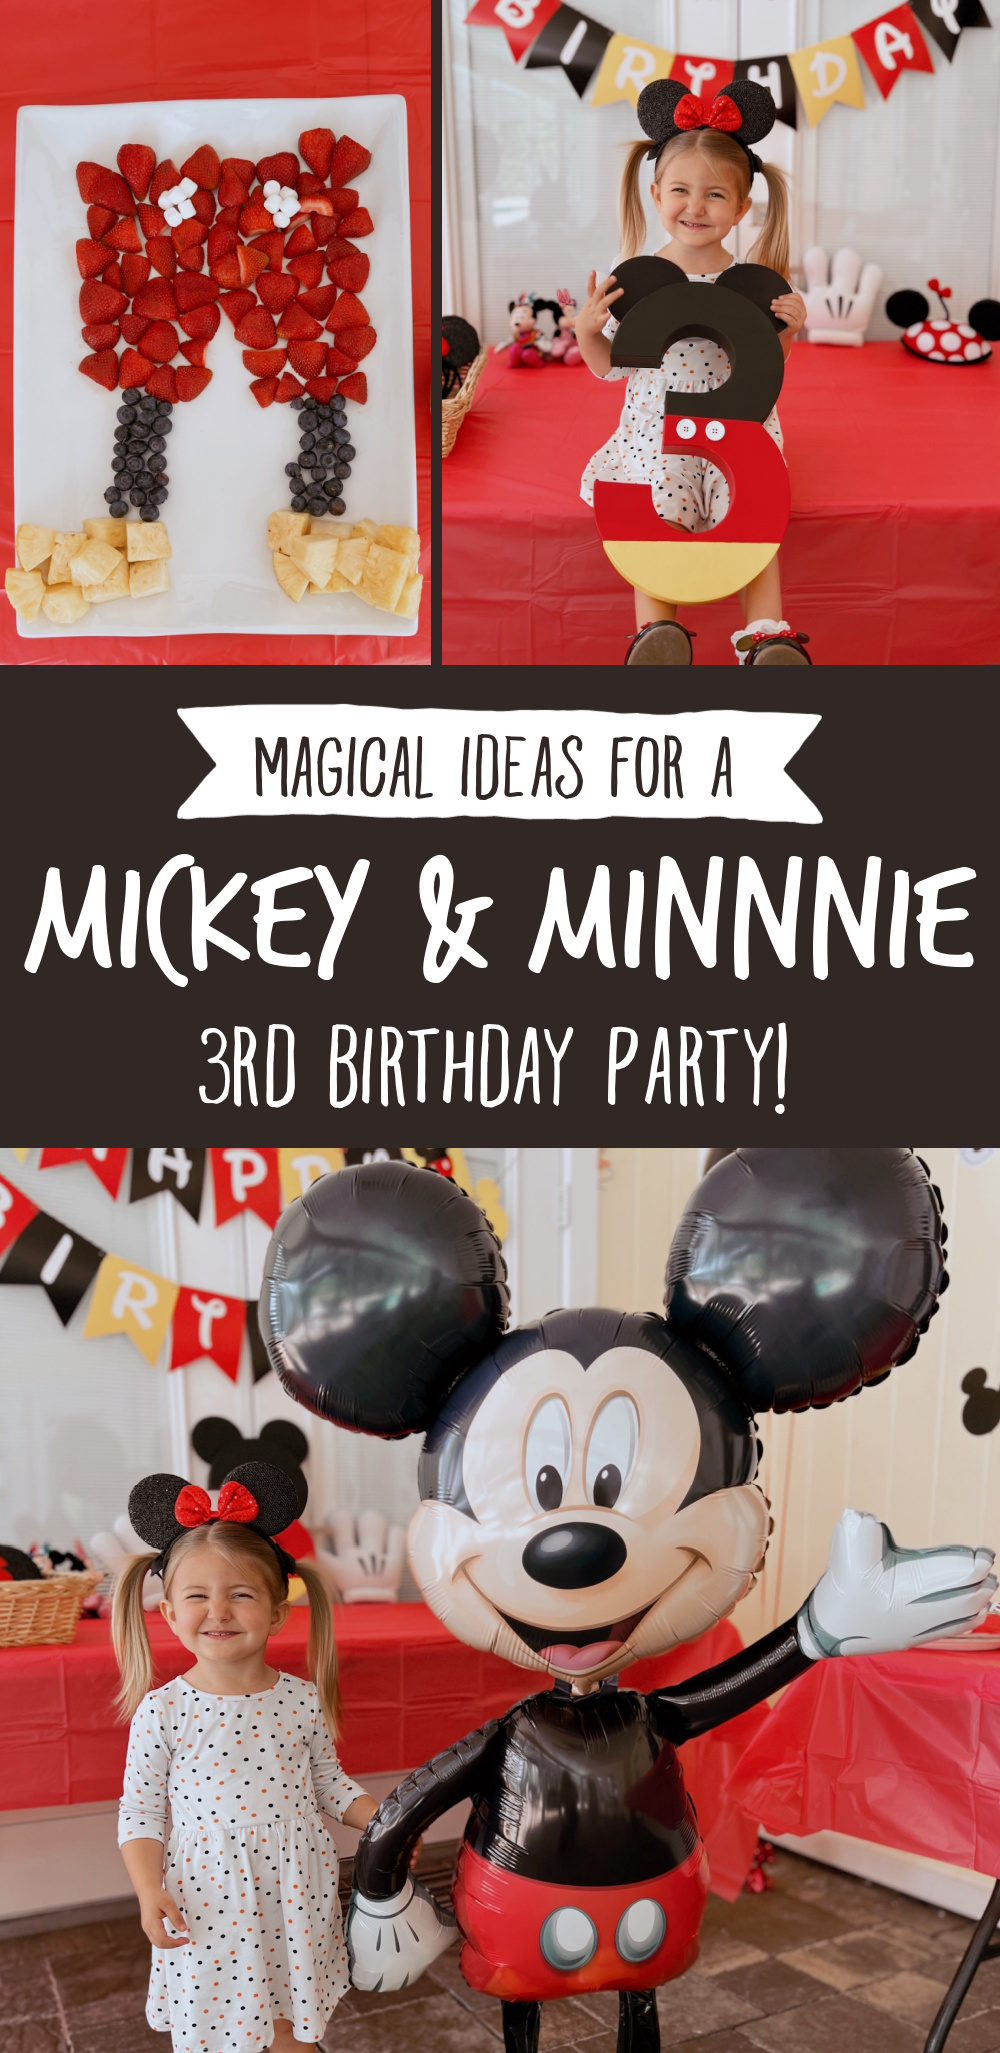 Magical "Mickey & Minnie Mouse" Birthday Party Ideas - the thinking closet